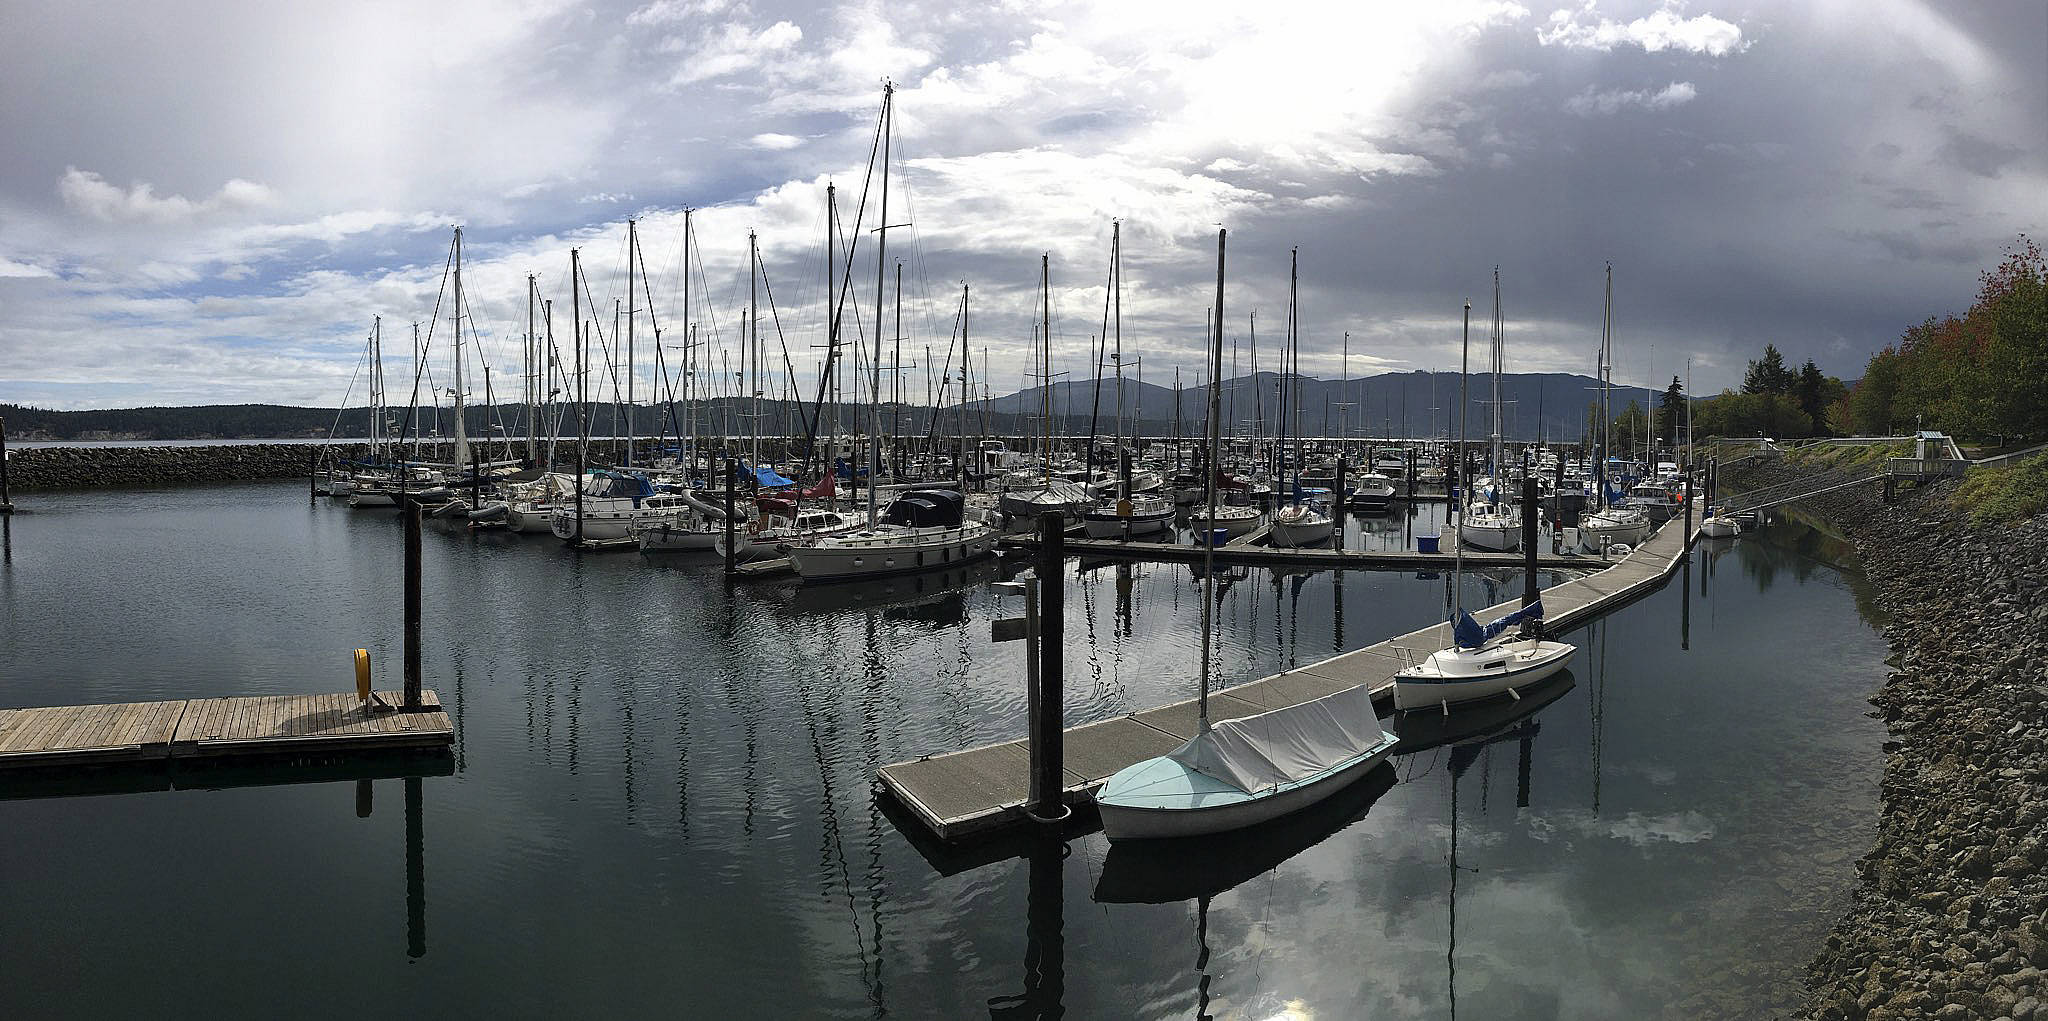 A new proposal from the City of Sequim asks contractors to evaluate current and ongoing costs for the John Wayne Marina. Sequim City Manager Charlie Bush said there are a lot of things to consider about the marina before considering taking on ownership. “We want to be as clear as possible on costs ... It’s a big policy decision for the (city) council and we want to know what it would mean for our long-term budget,” he said. Sequim Gazette photo by Matthew Nash